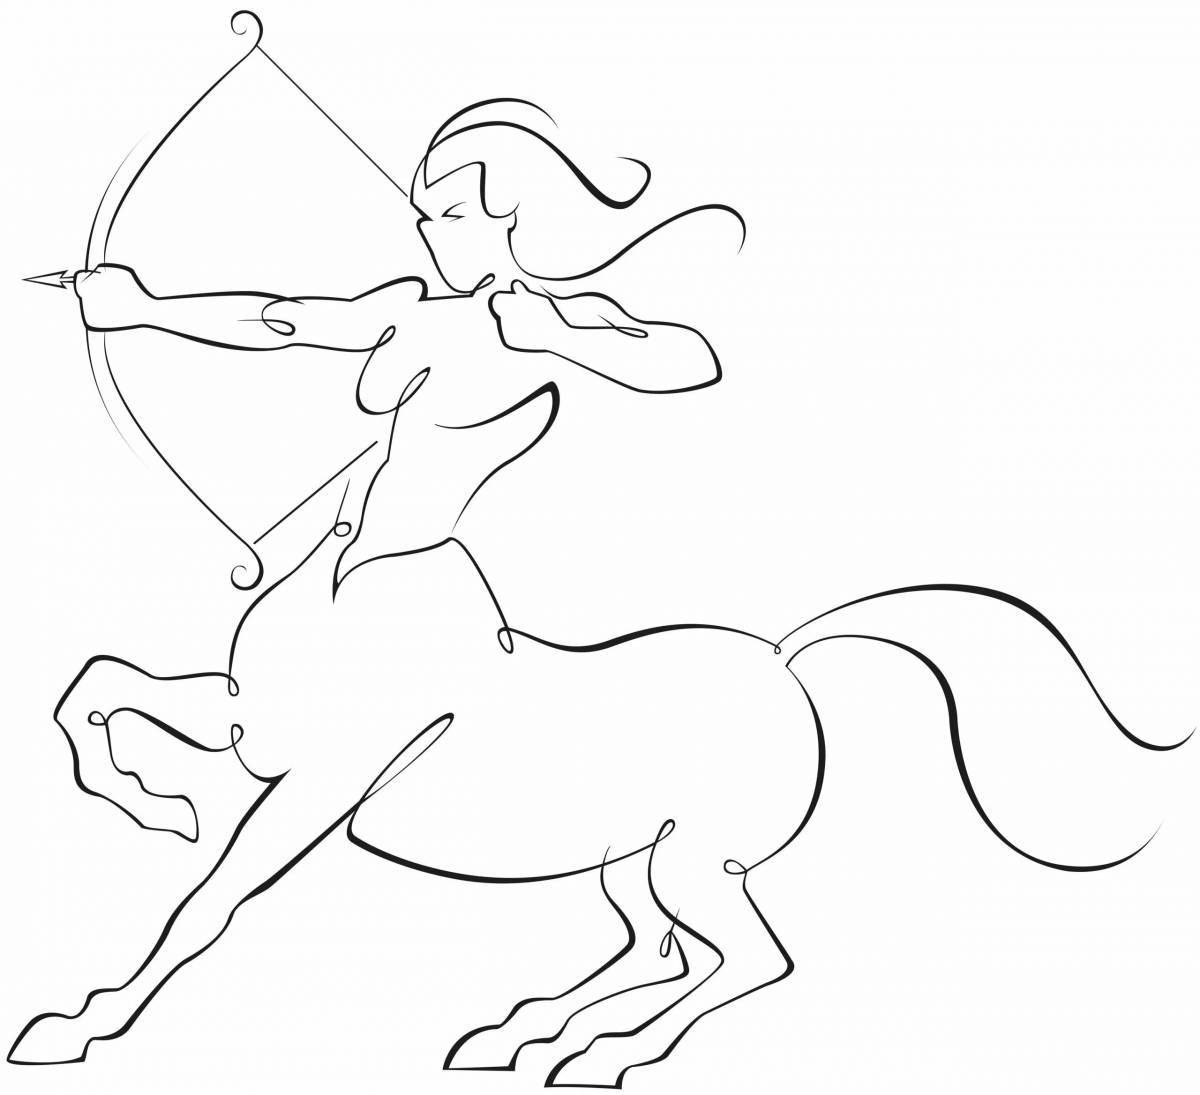 Coloring book striking archer